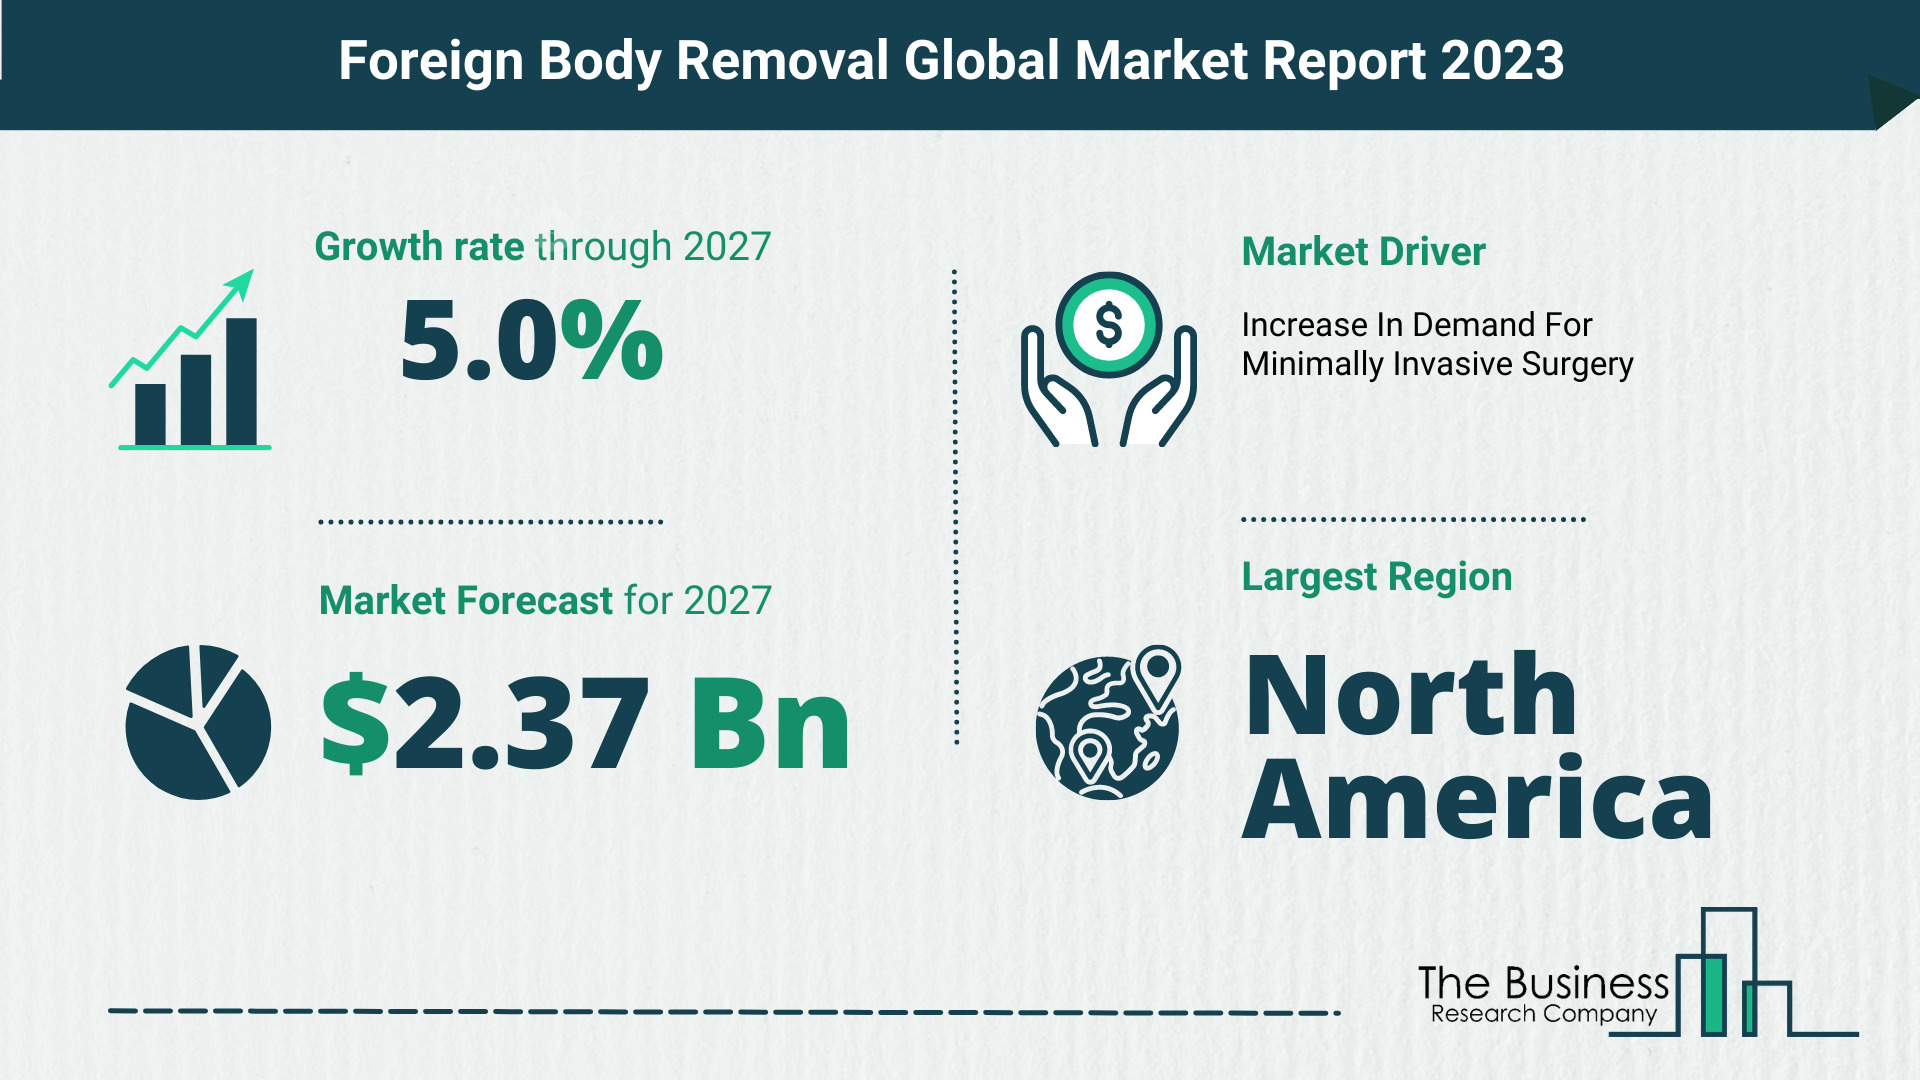 Global Foreign Body Removal Market Opportunities And Strategies 2023